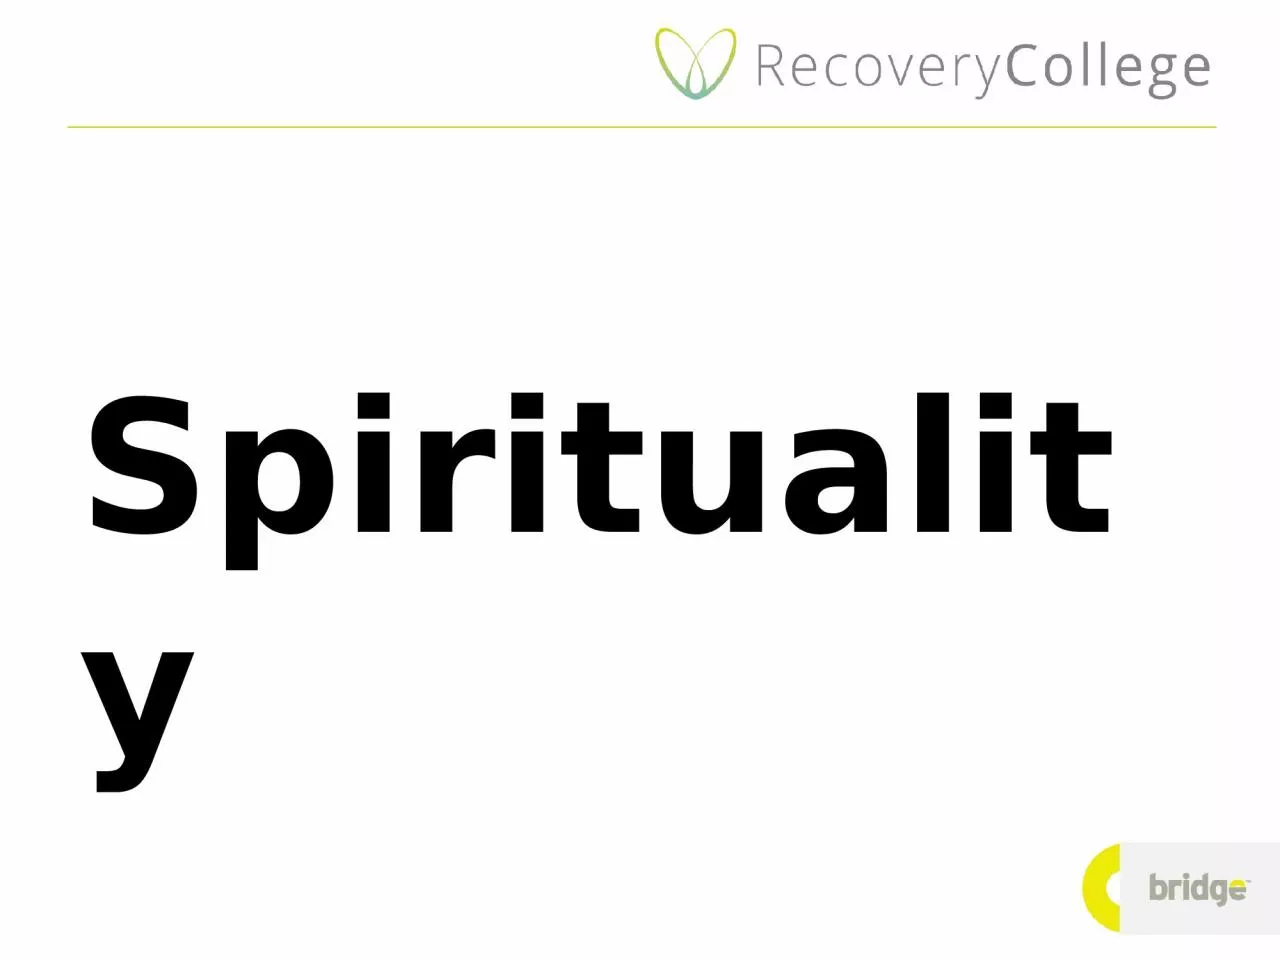 Spirituality “Spirituality is that which gives meaning to one's life and draws one to